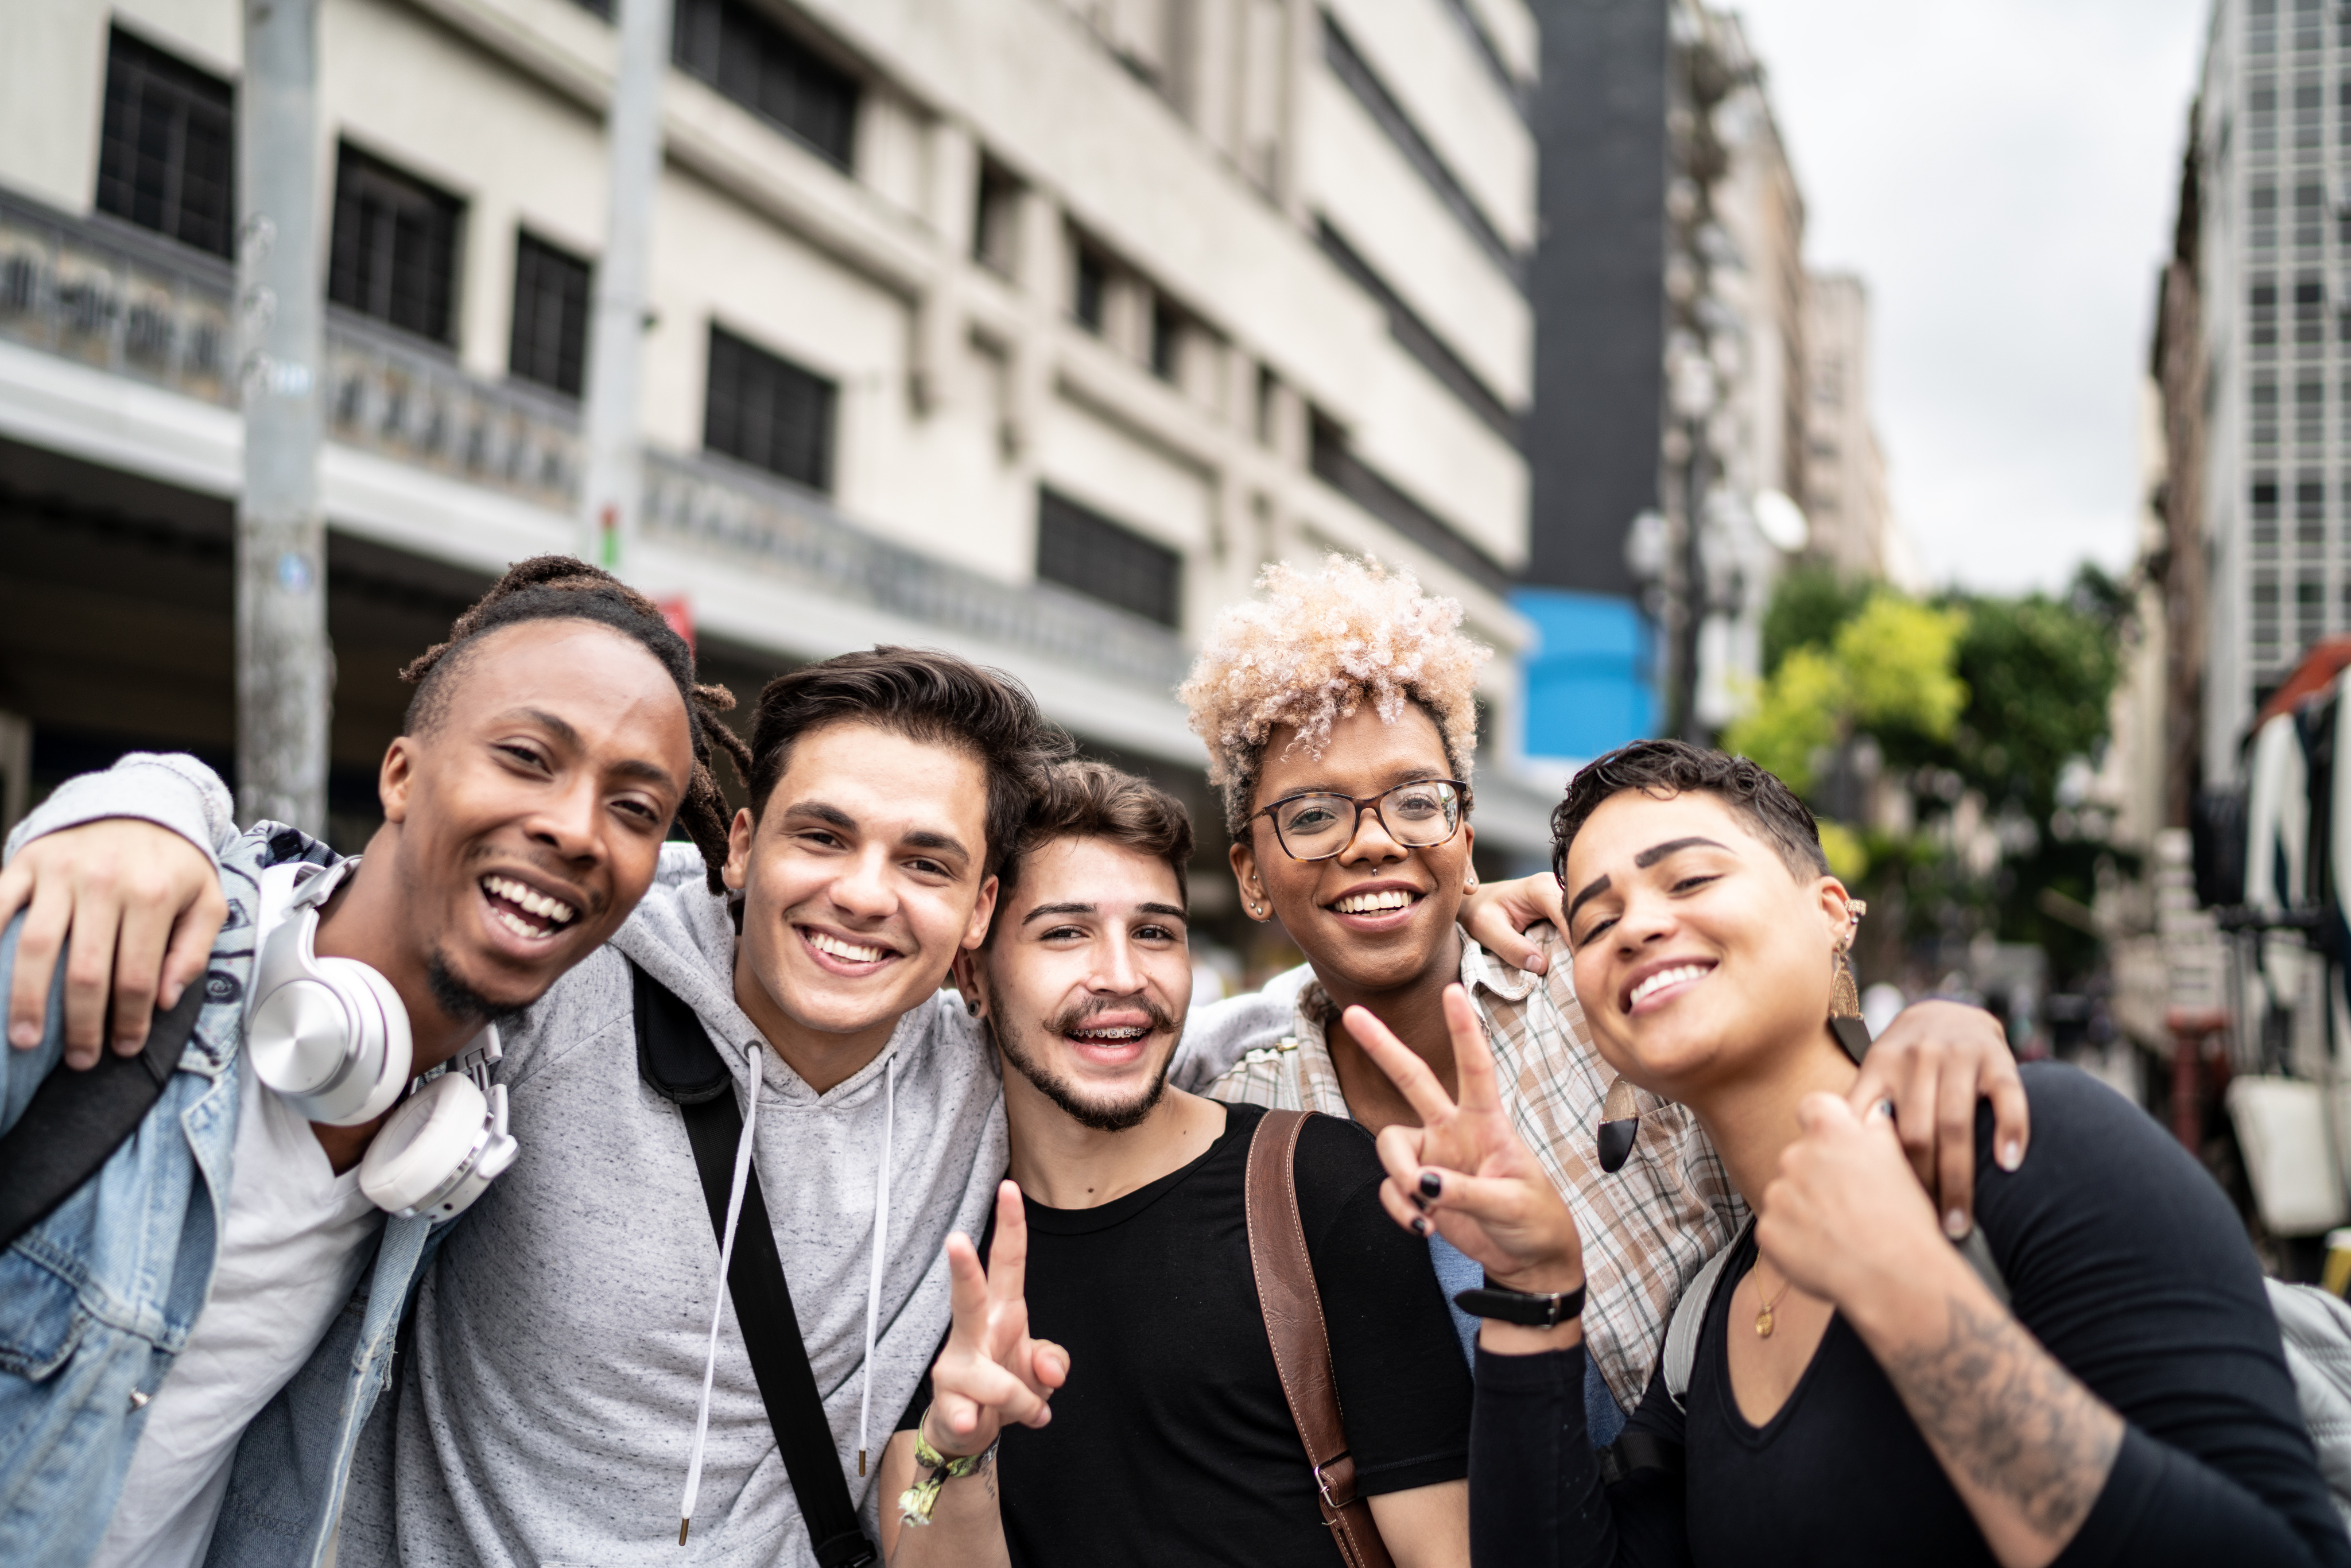 A group of young diverse people taking a photo.